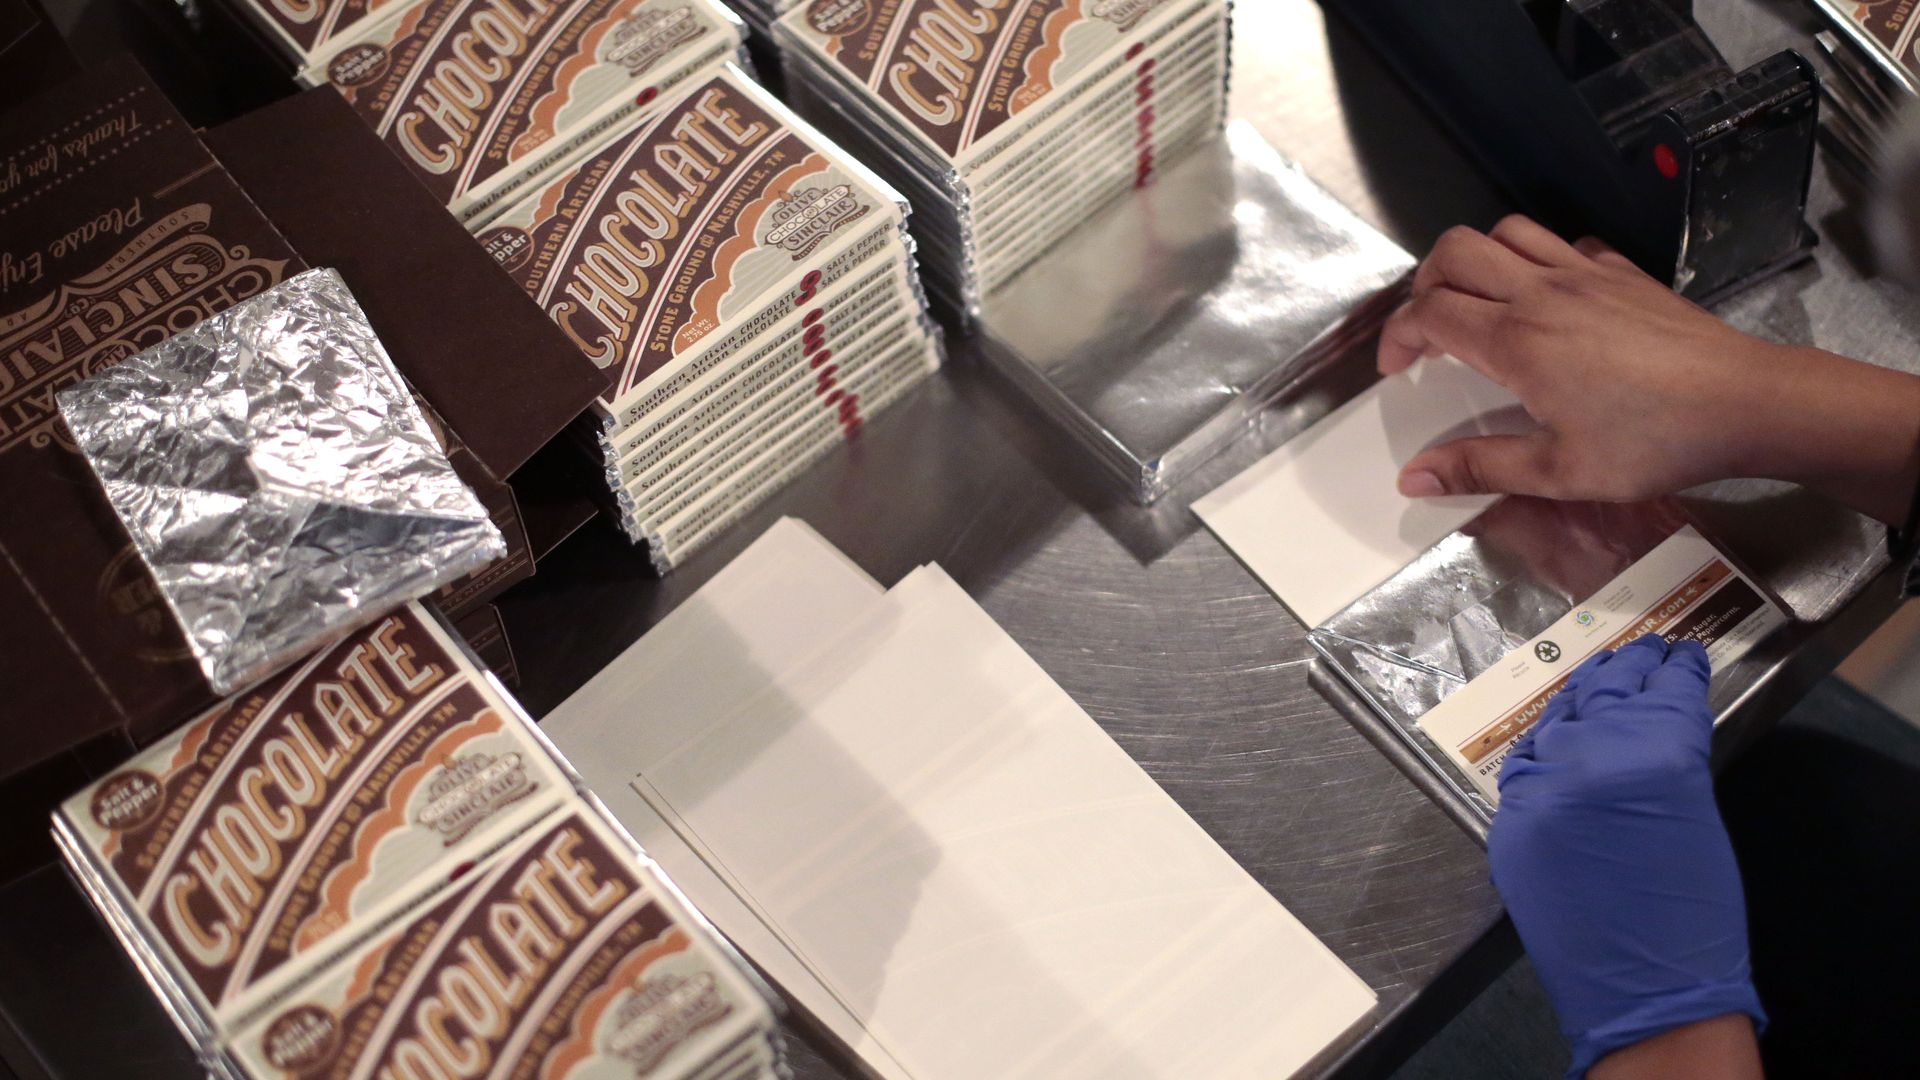 Hands shown wrapping chocolate bars in paper wrappers. Finished packaged bars are stacked around the table.